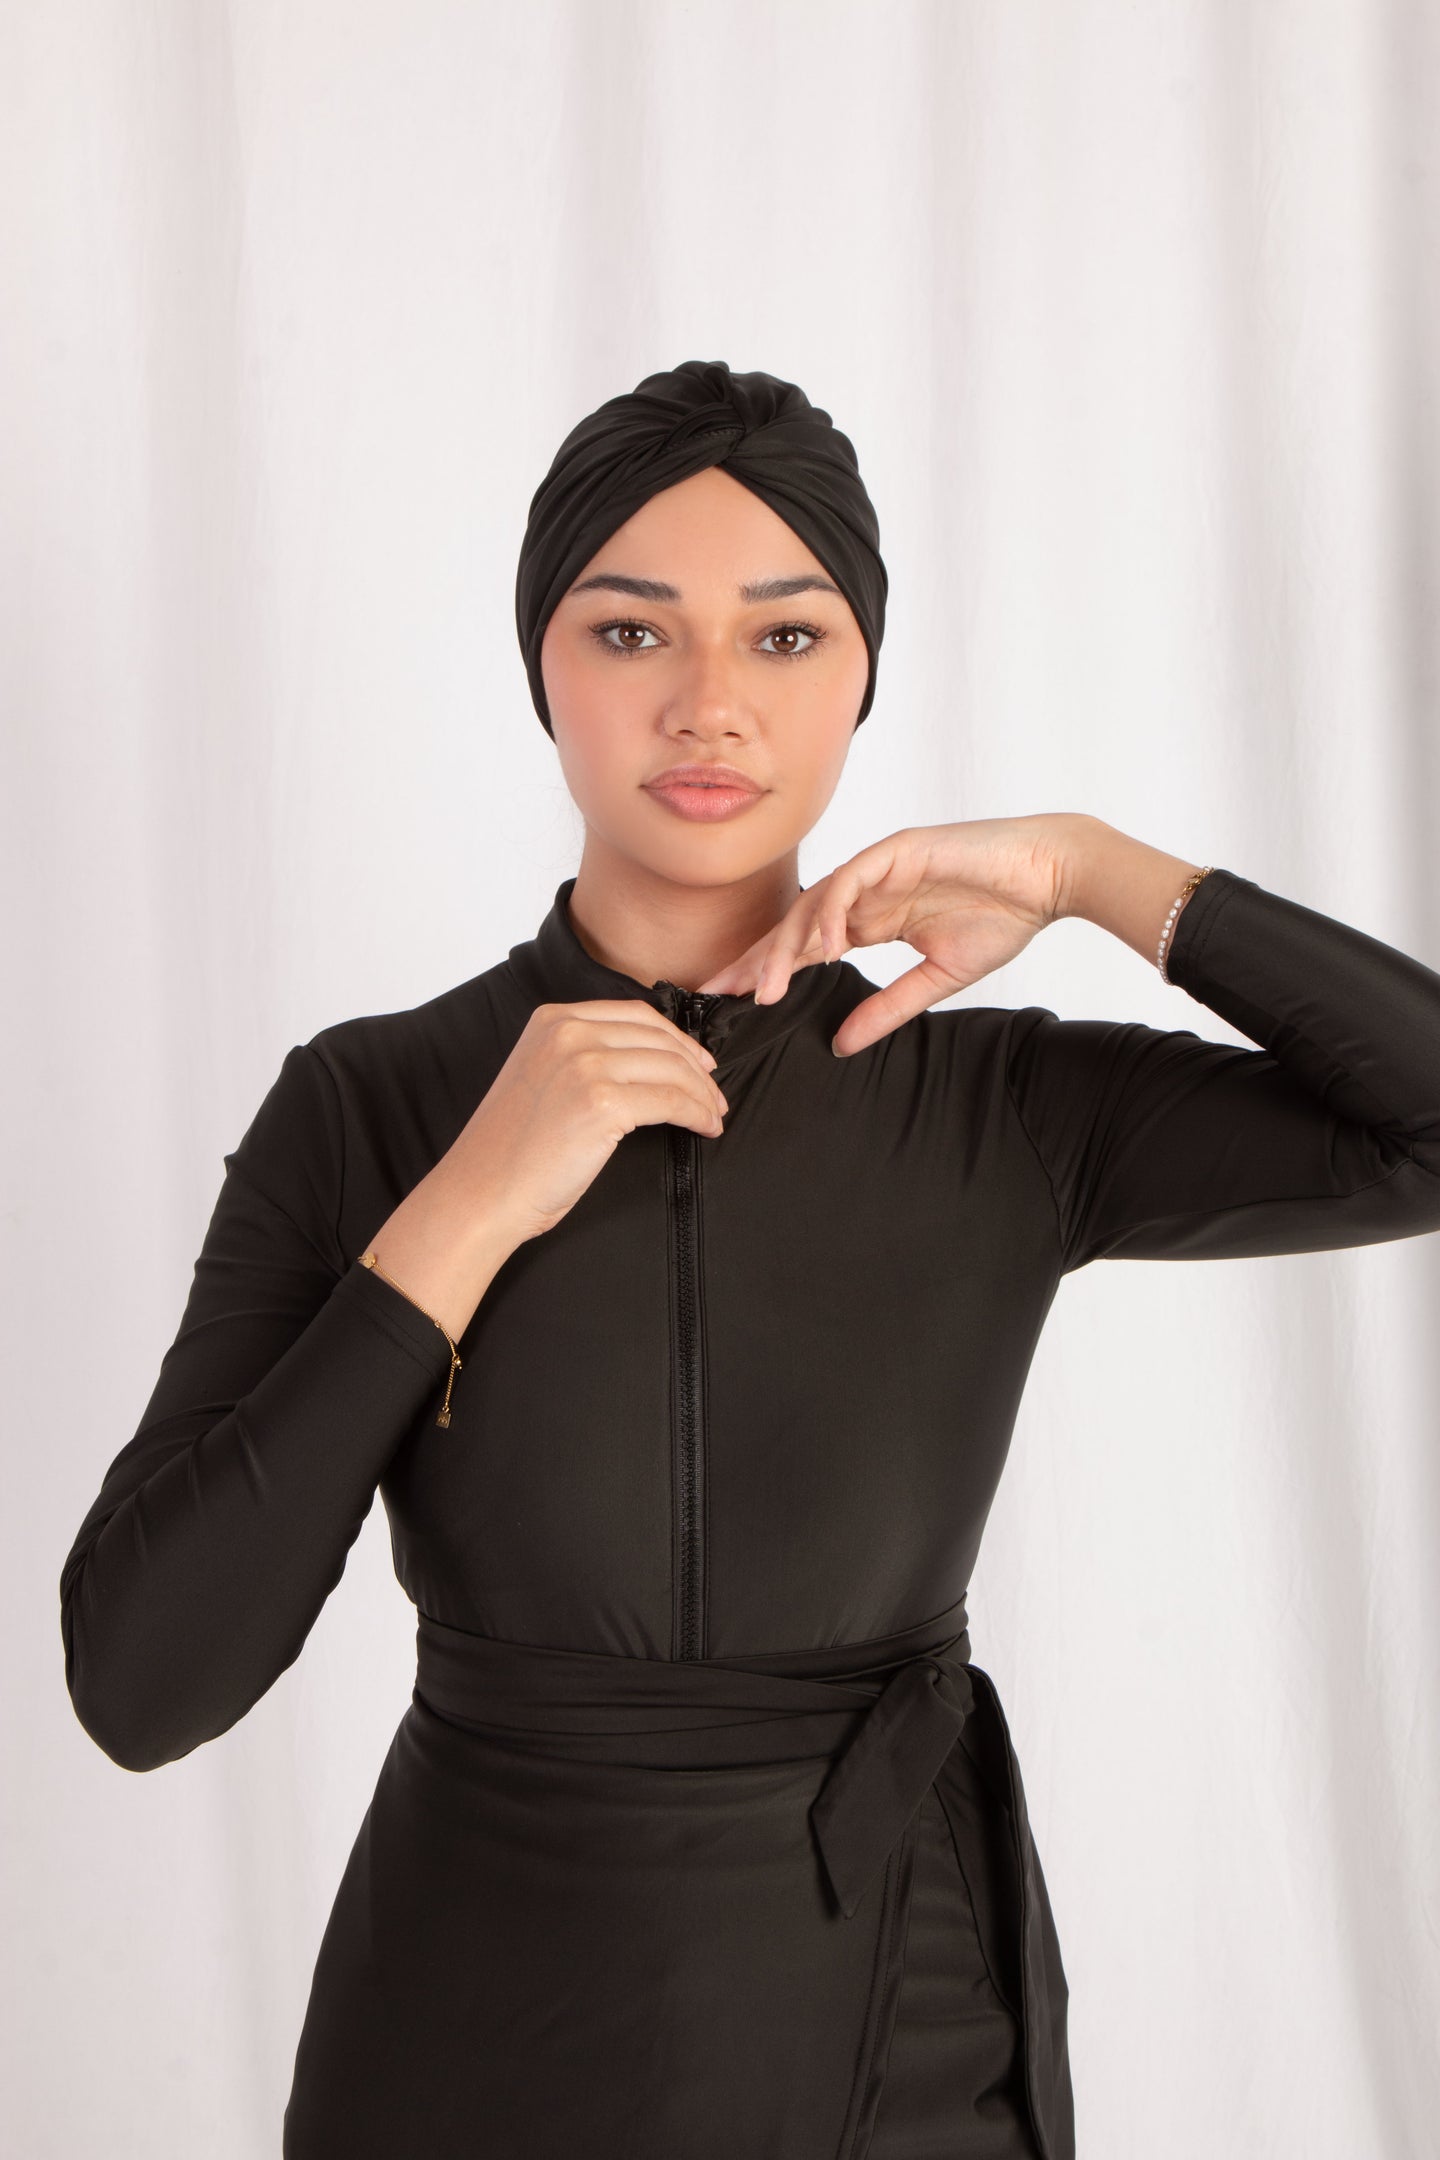 Are You An Active Hijabi? Bet On These Modest Activewear Brands